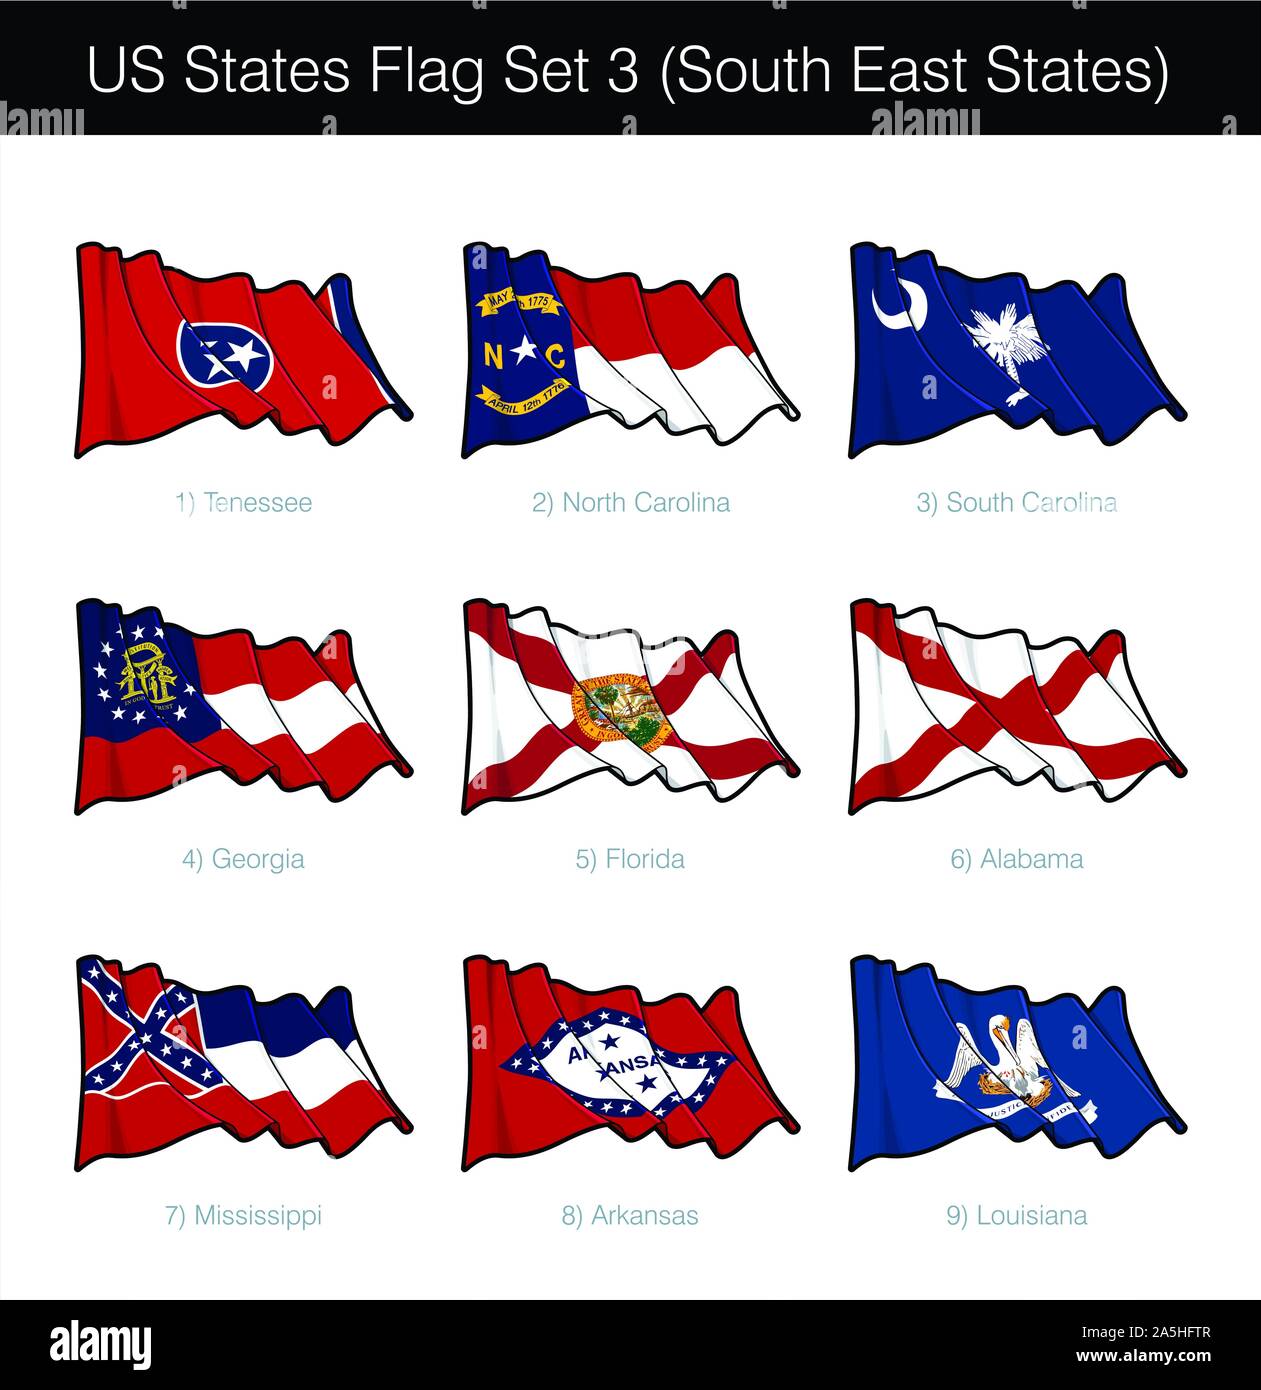 US South East States Flag Set. It includes the flags of Tennessee, North and South Carolina, Georgia, Florida, Alabama, Mississippi, Arkansas n Louisi Stock Vector